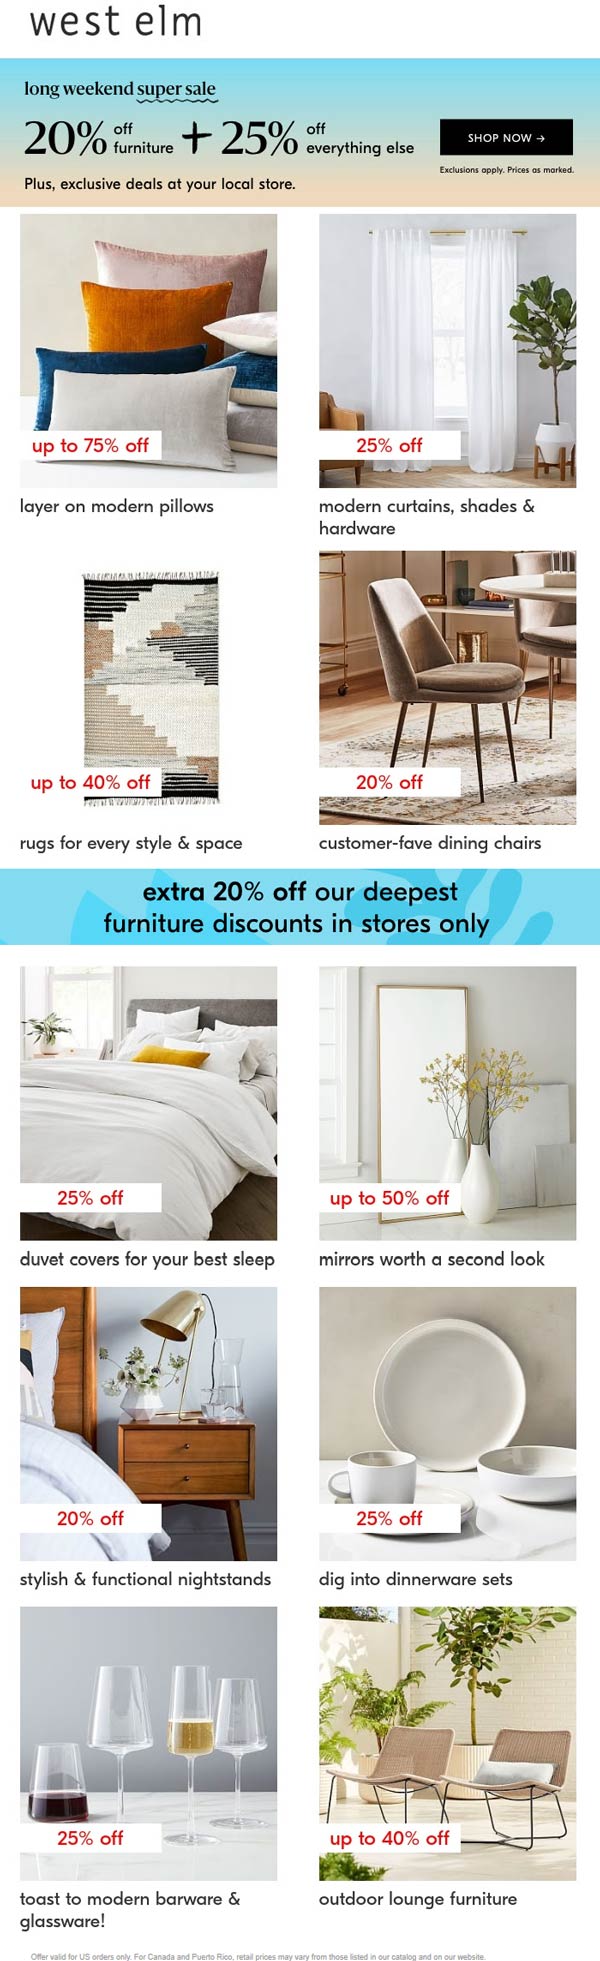 West Elm stores Coupon  25% off & more at West Elm furniture, ditto online #westelm